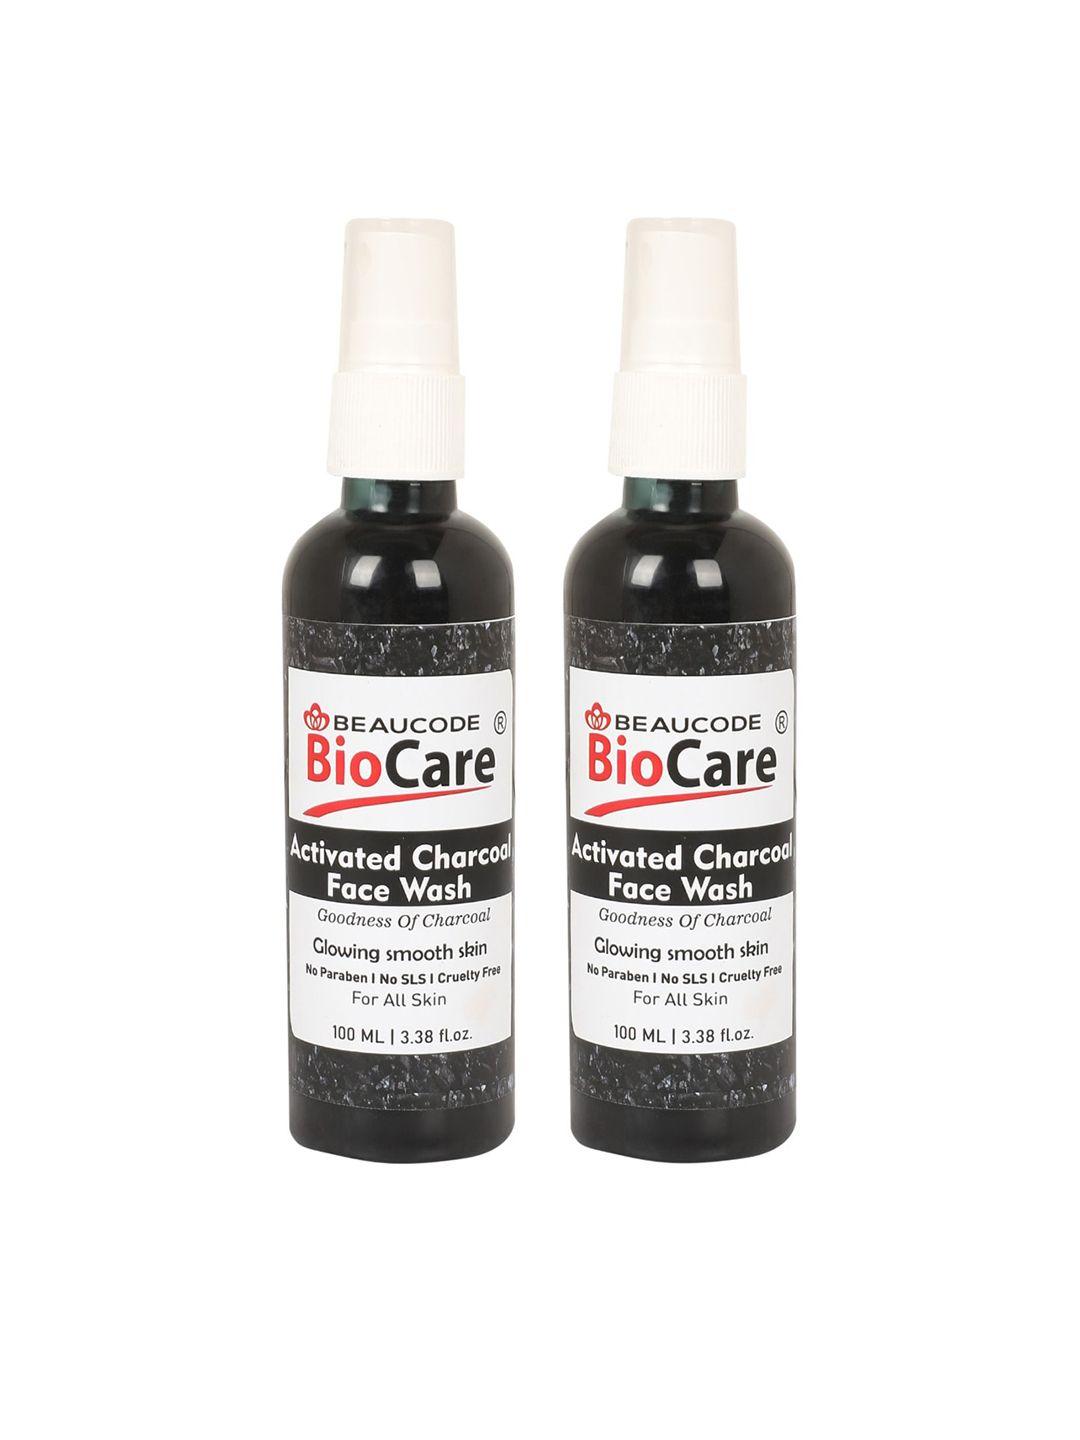 beaucode biocare set of 2 activated charcoal face wash - 100ml each